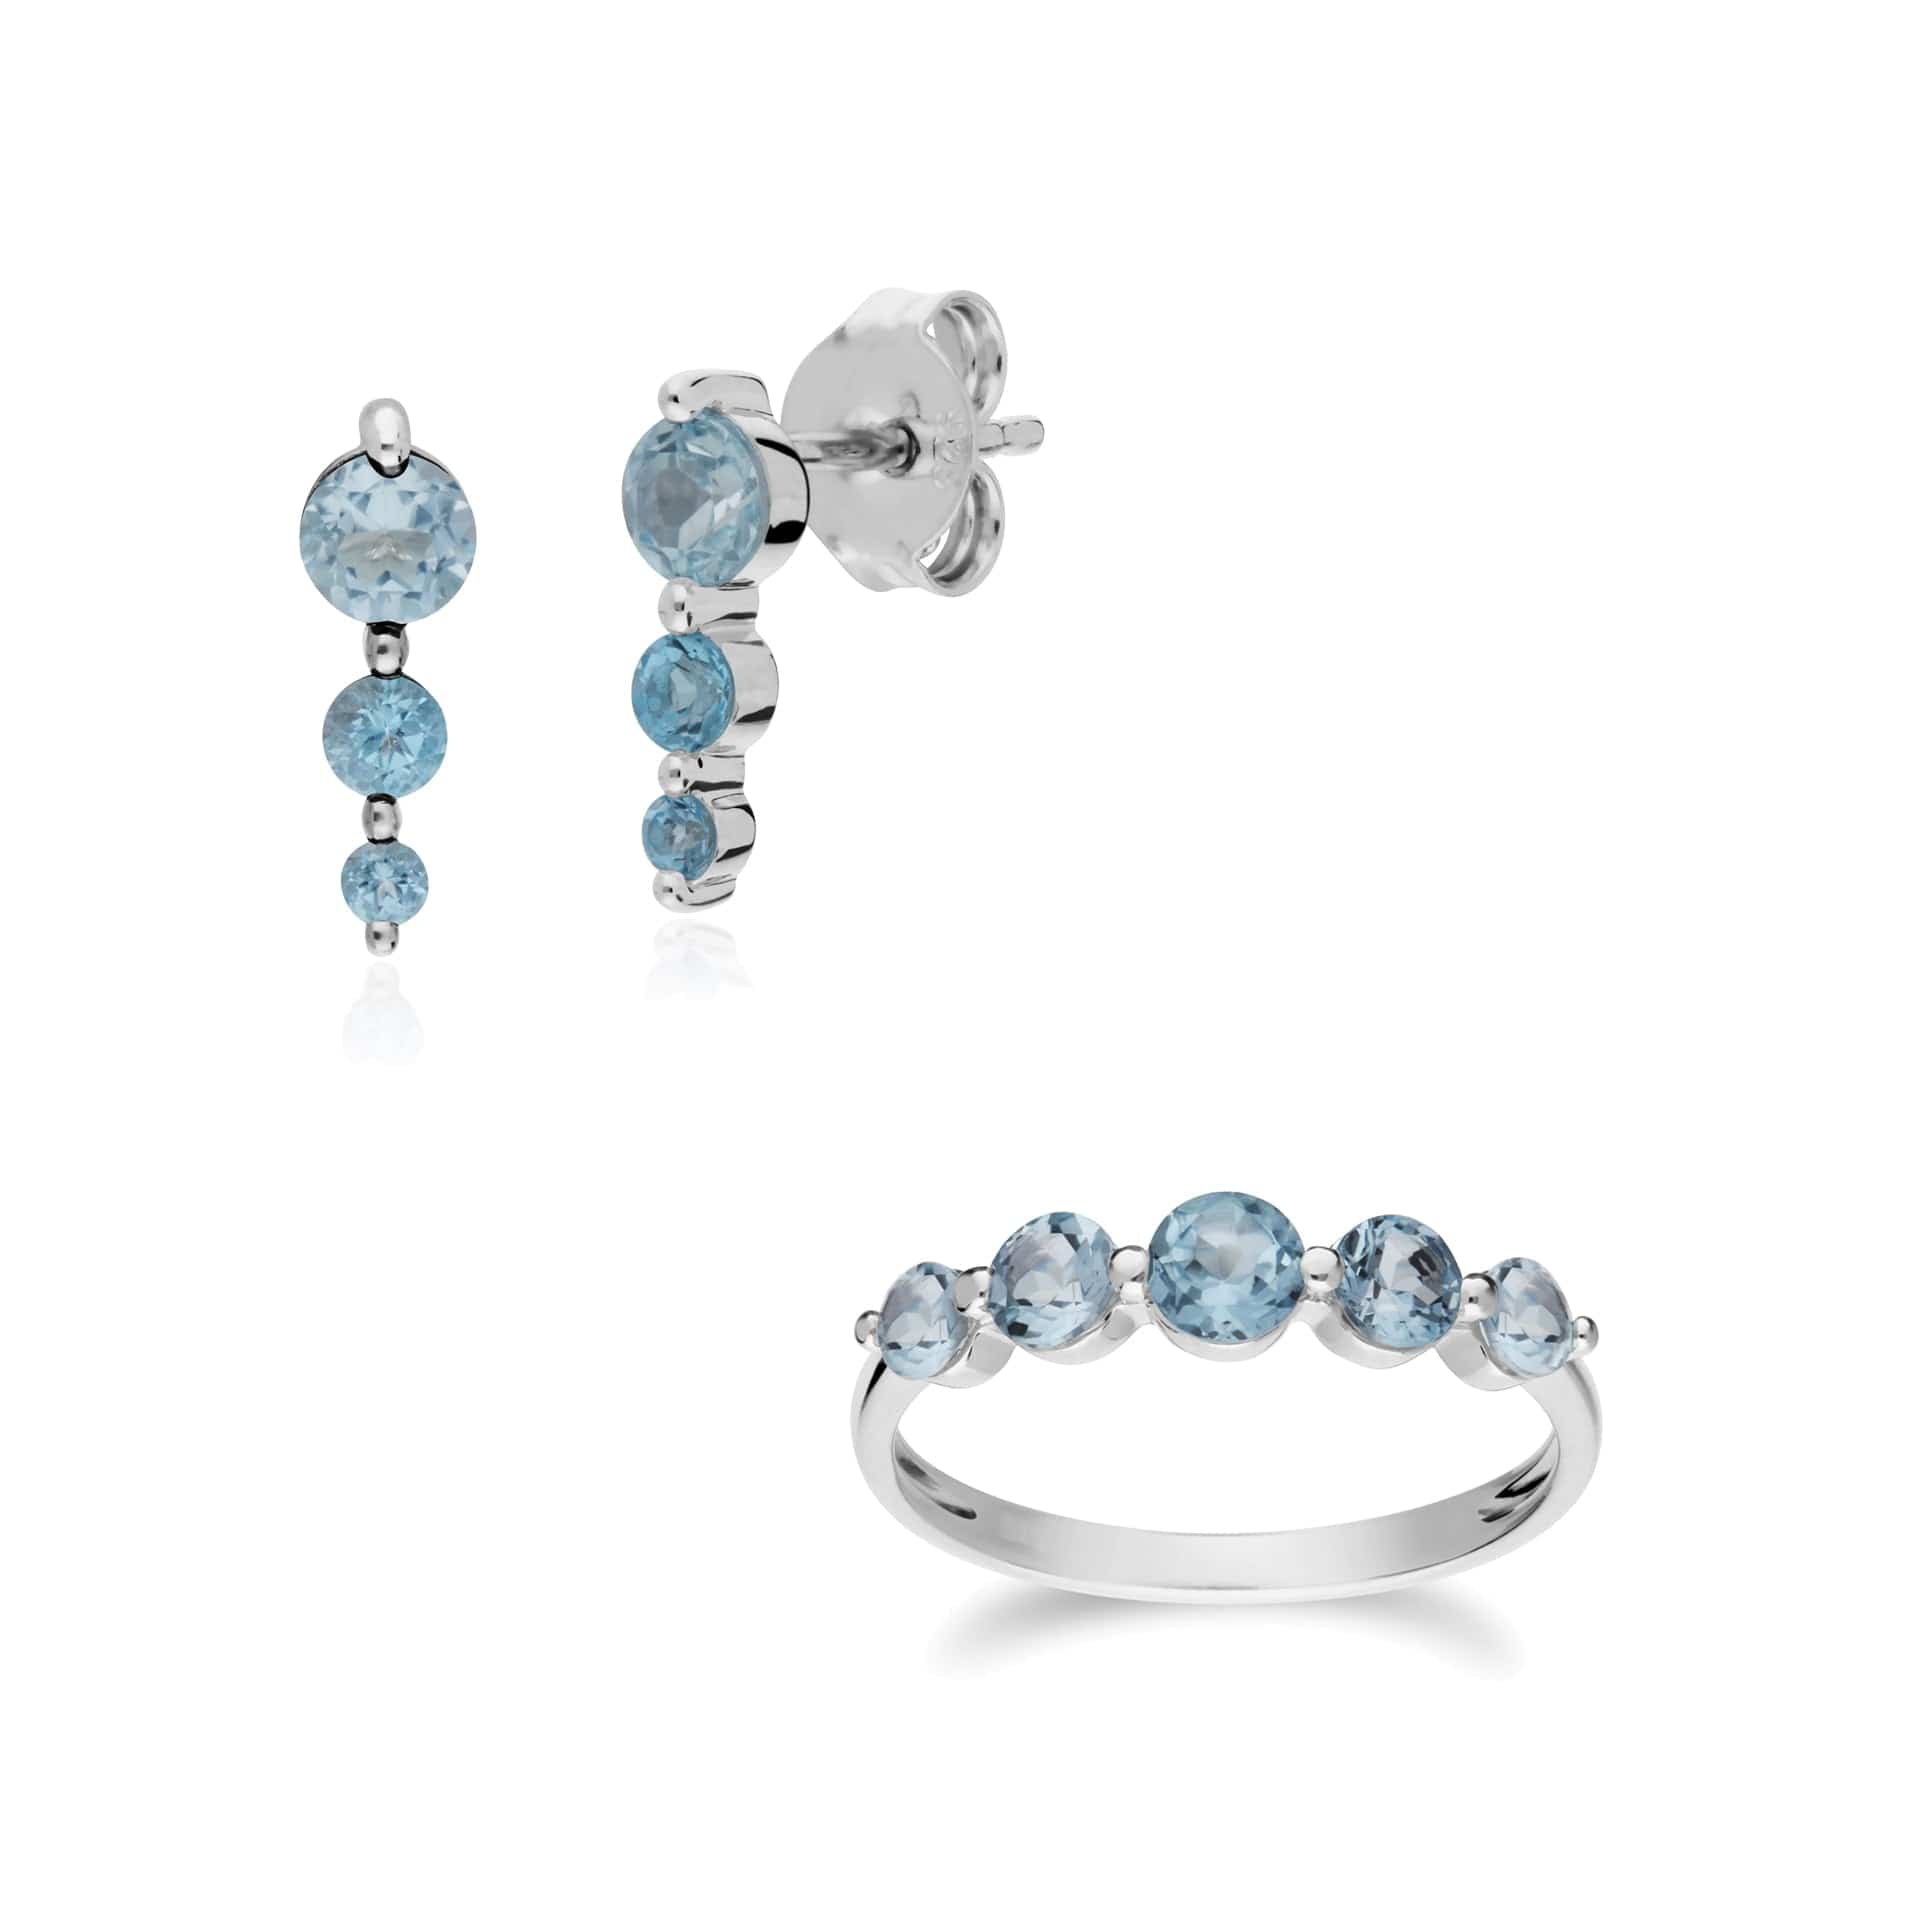 270E025501925-270R055901925 Classic Round Blue Topaz Three Stone Gradient Earrings & Five Stone Ring Set in 925 Sterling Silver 1